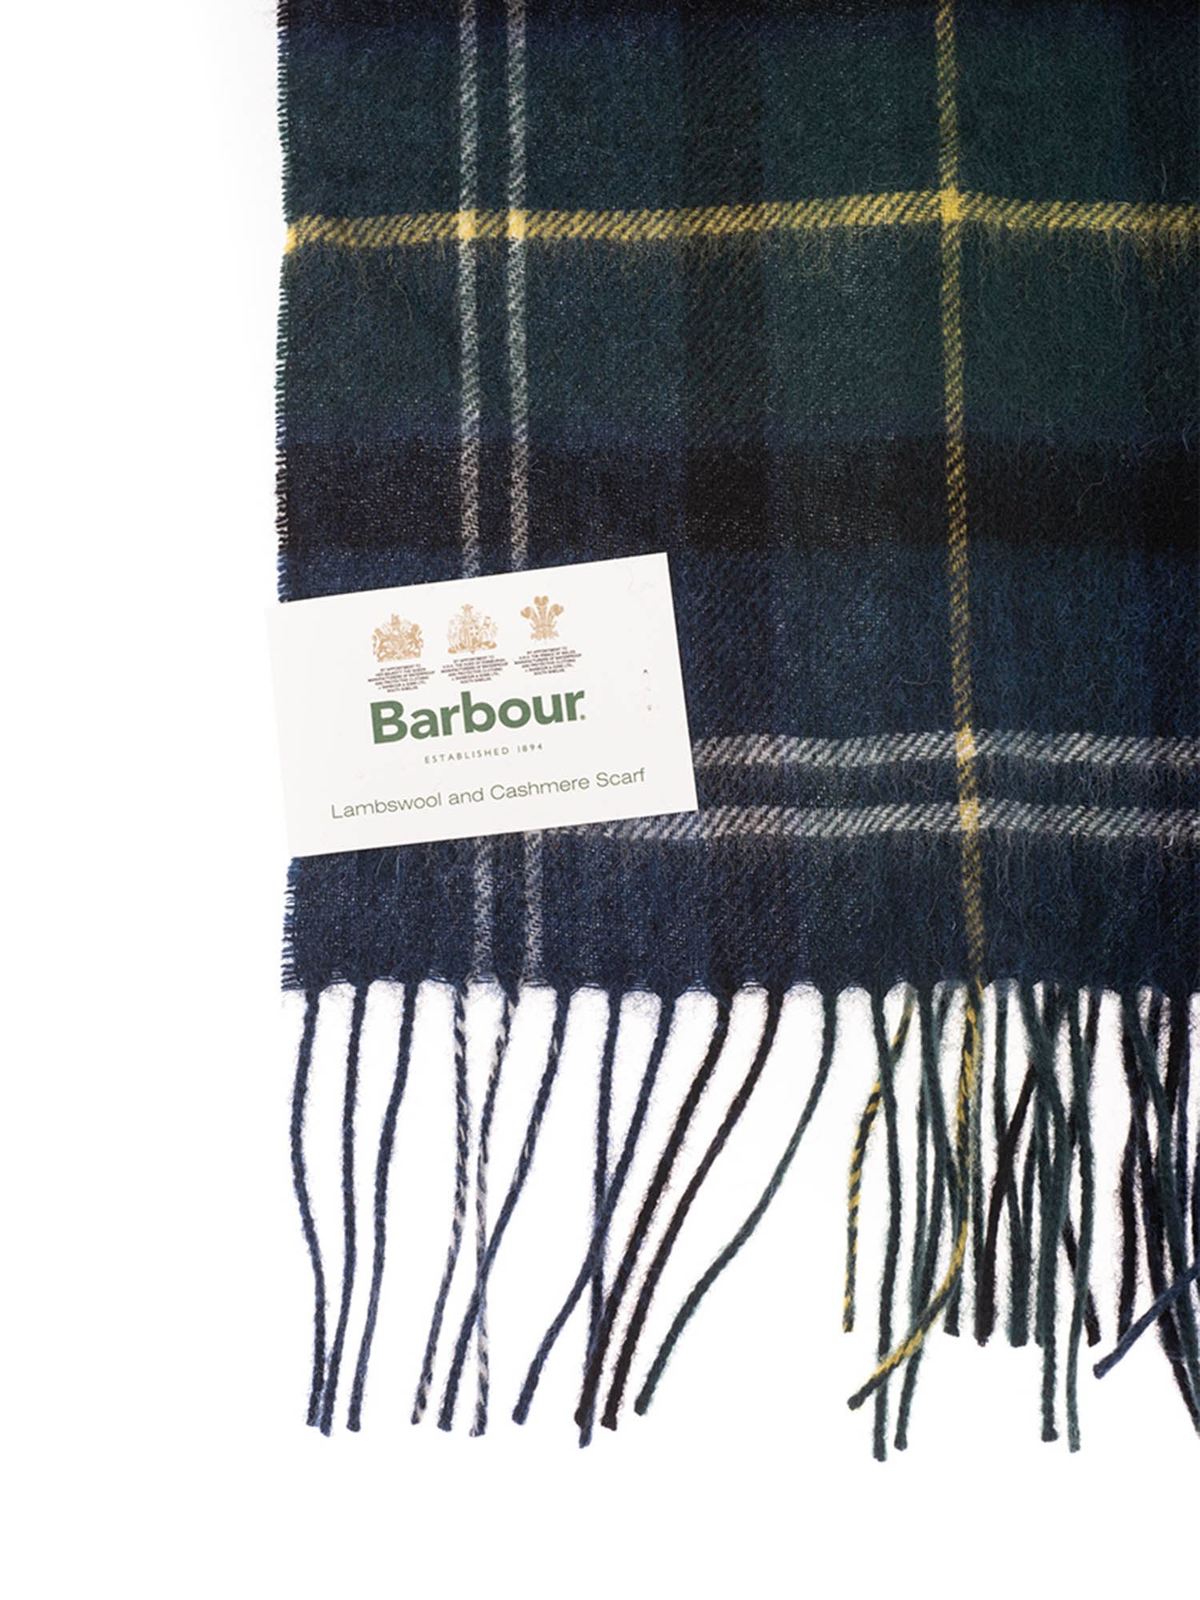 Barbour - Tartan scarf in green and 